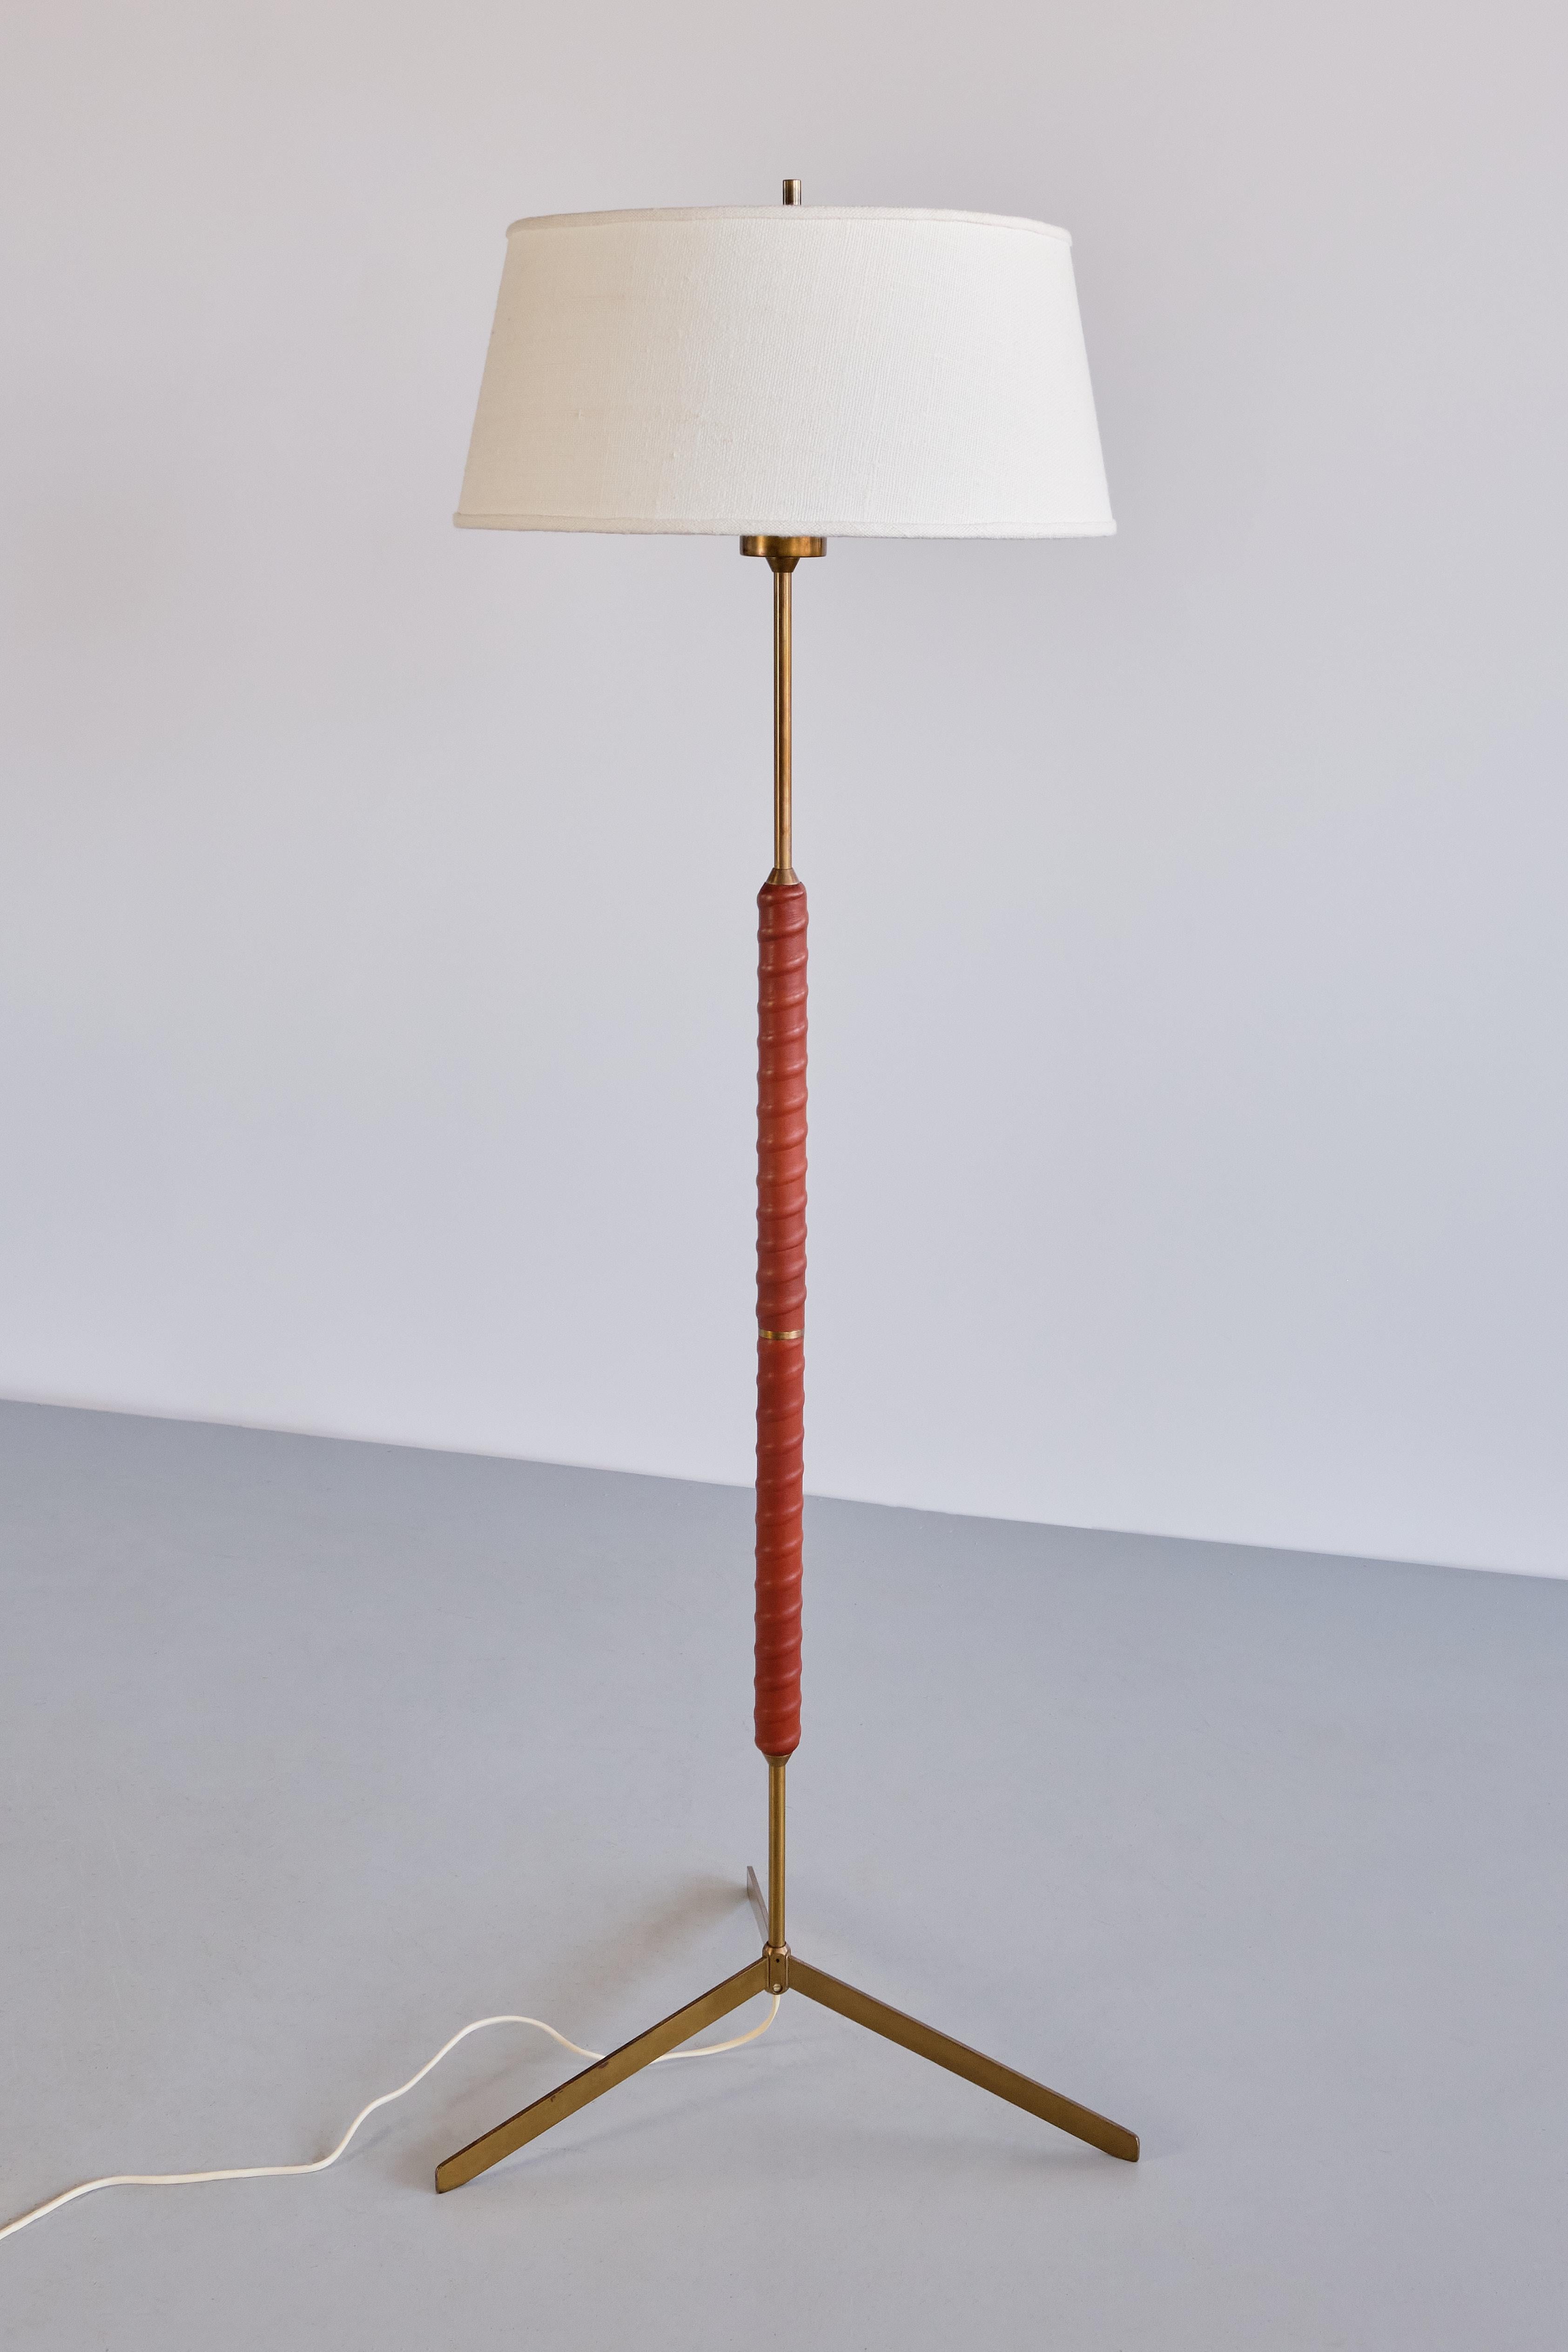 Pair of Bergboms G-31 Floor Lamps in Brass, Leather and Linen, Sweden, 1940s For Sale 2